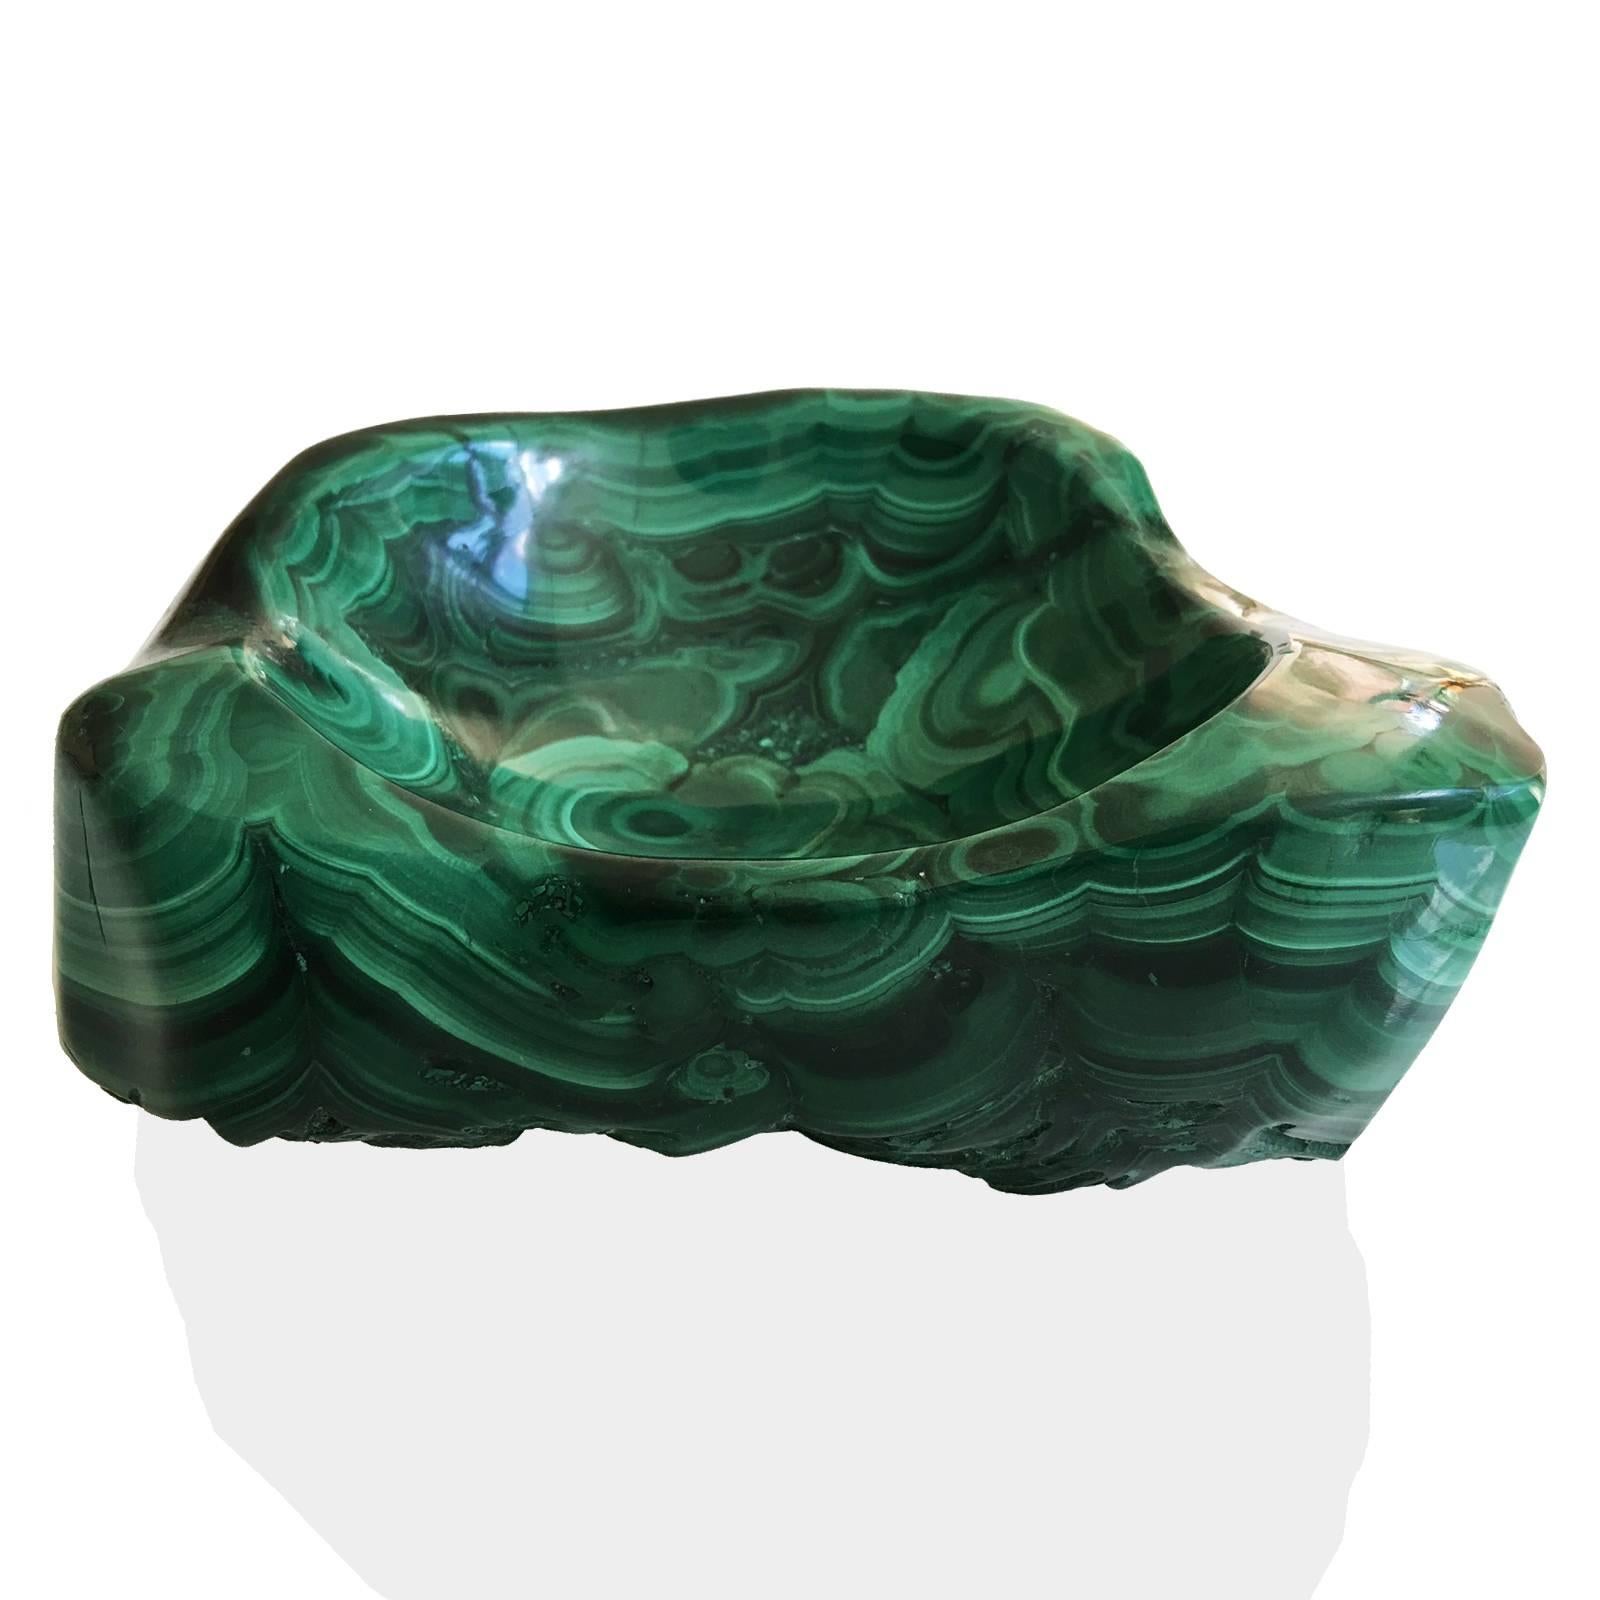 A spectacular piece of polished African malachite shaped as a bowl.
Great specimen with aesthetic pattern, good color and high contrast.